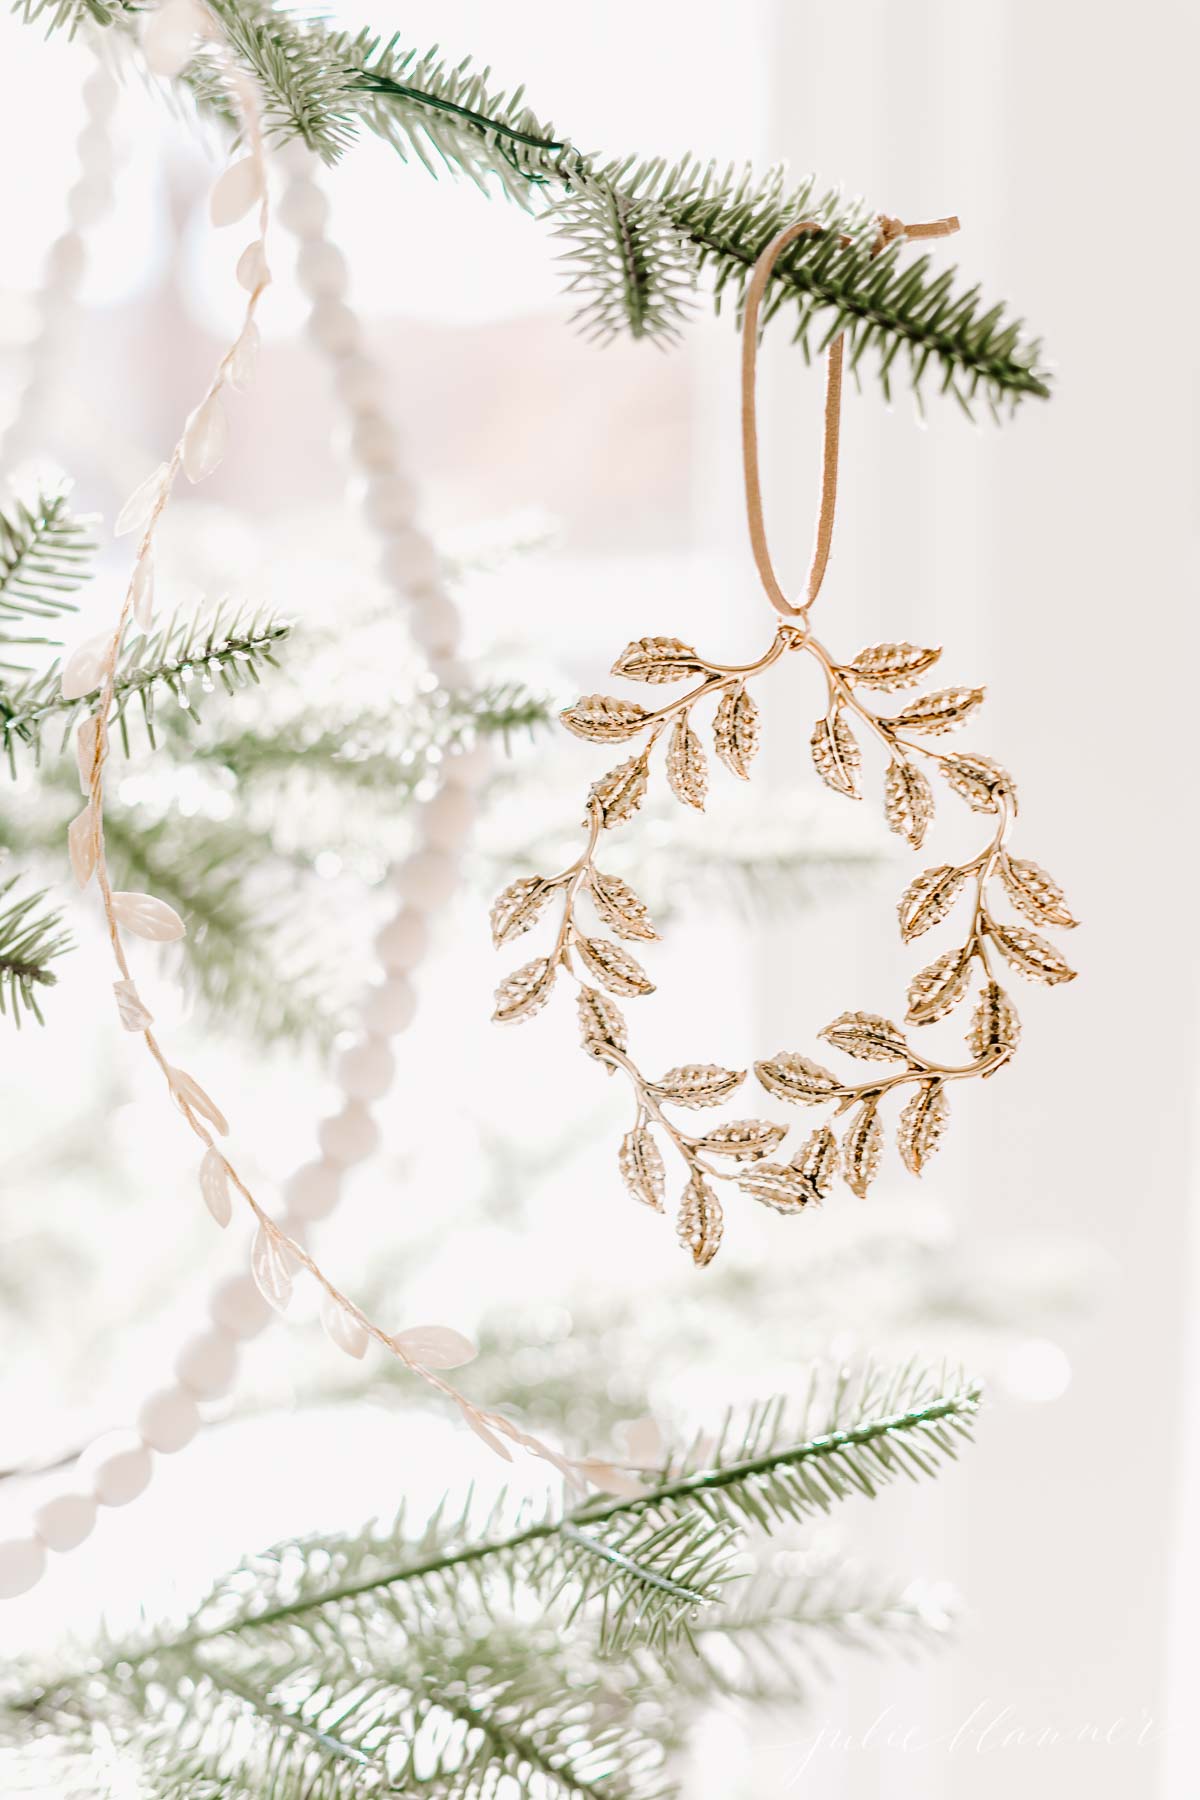 A gold laurel wreath ornament hangs on a Christmas tree.